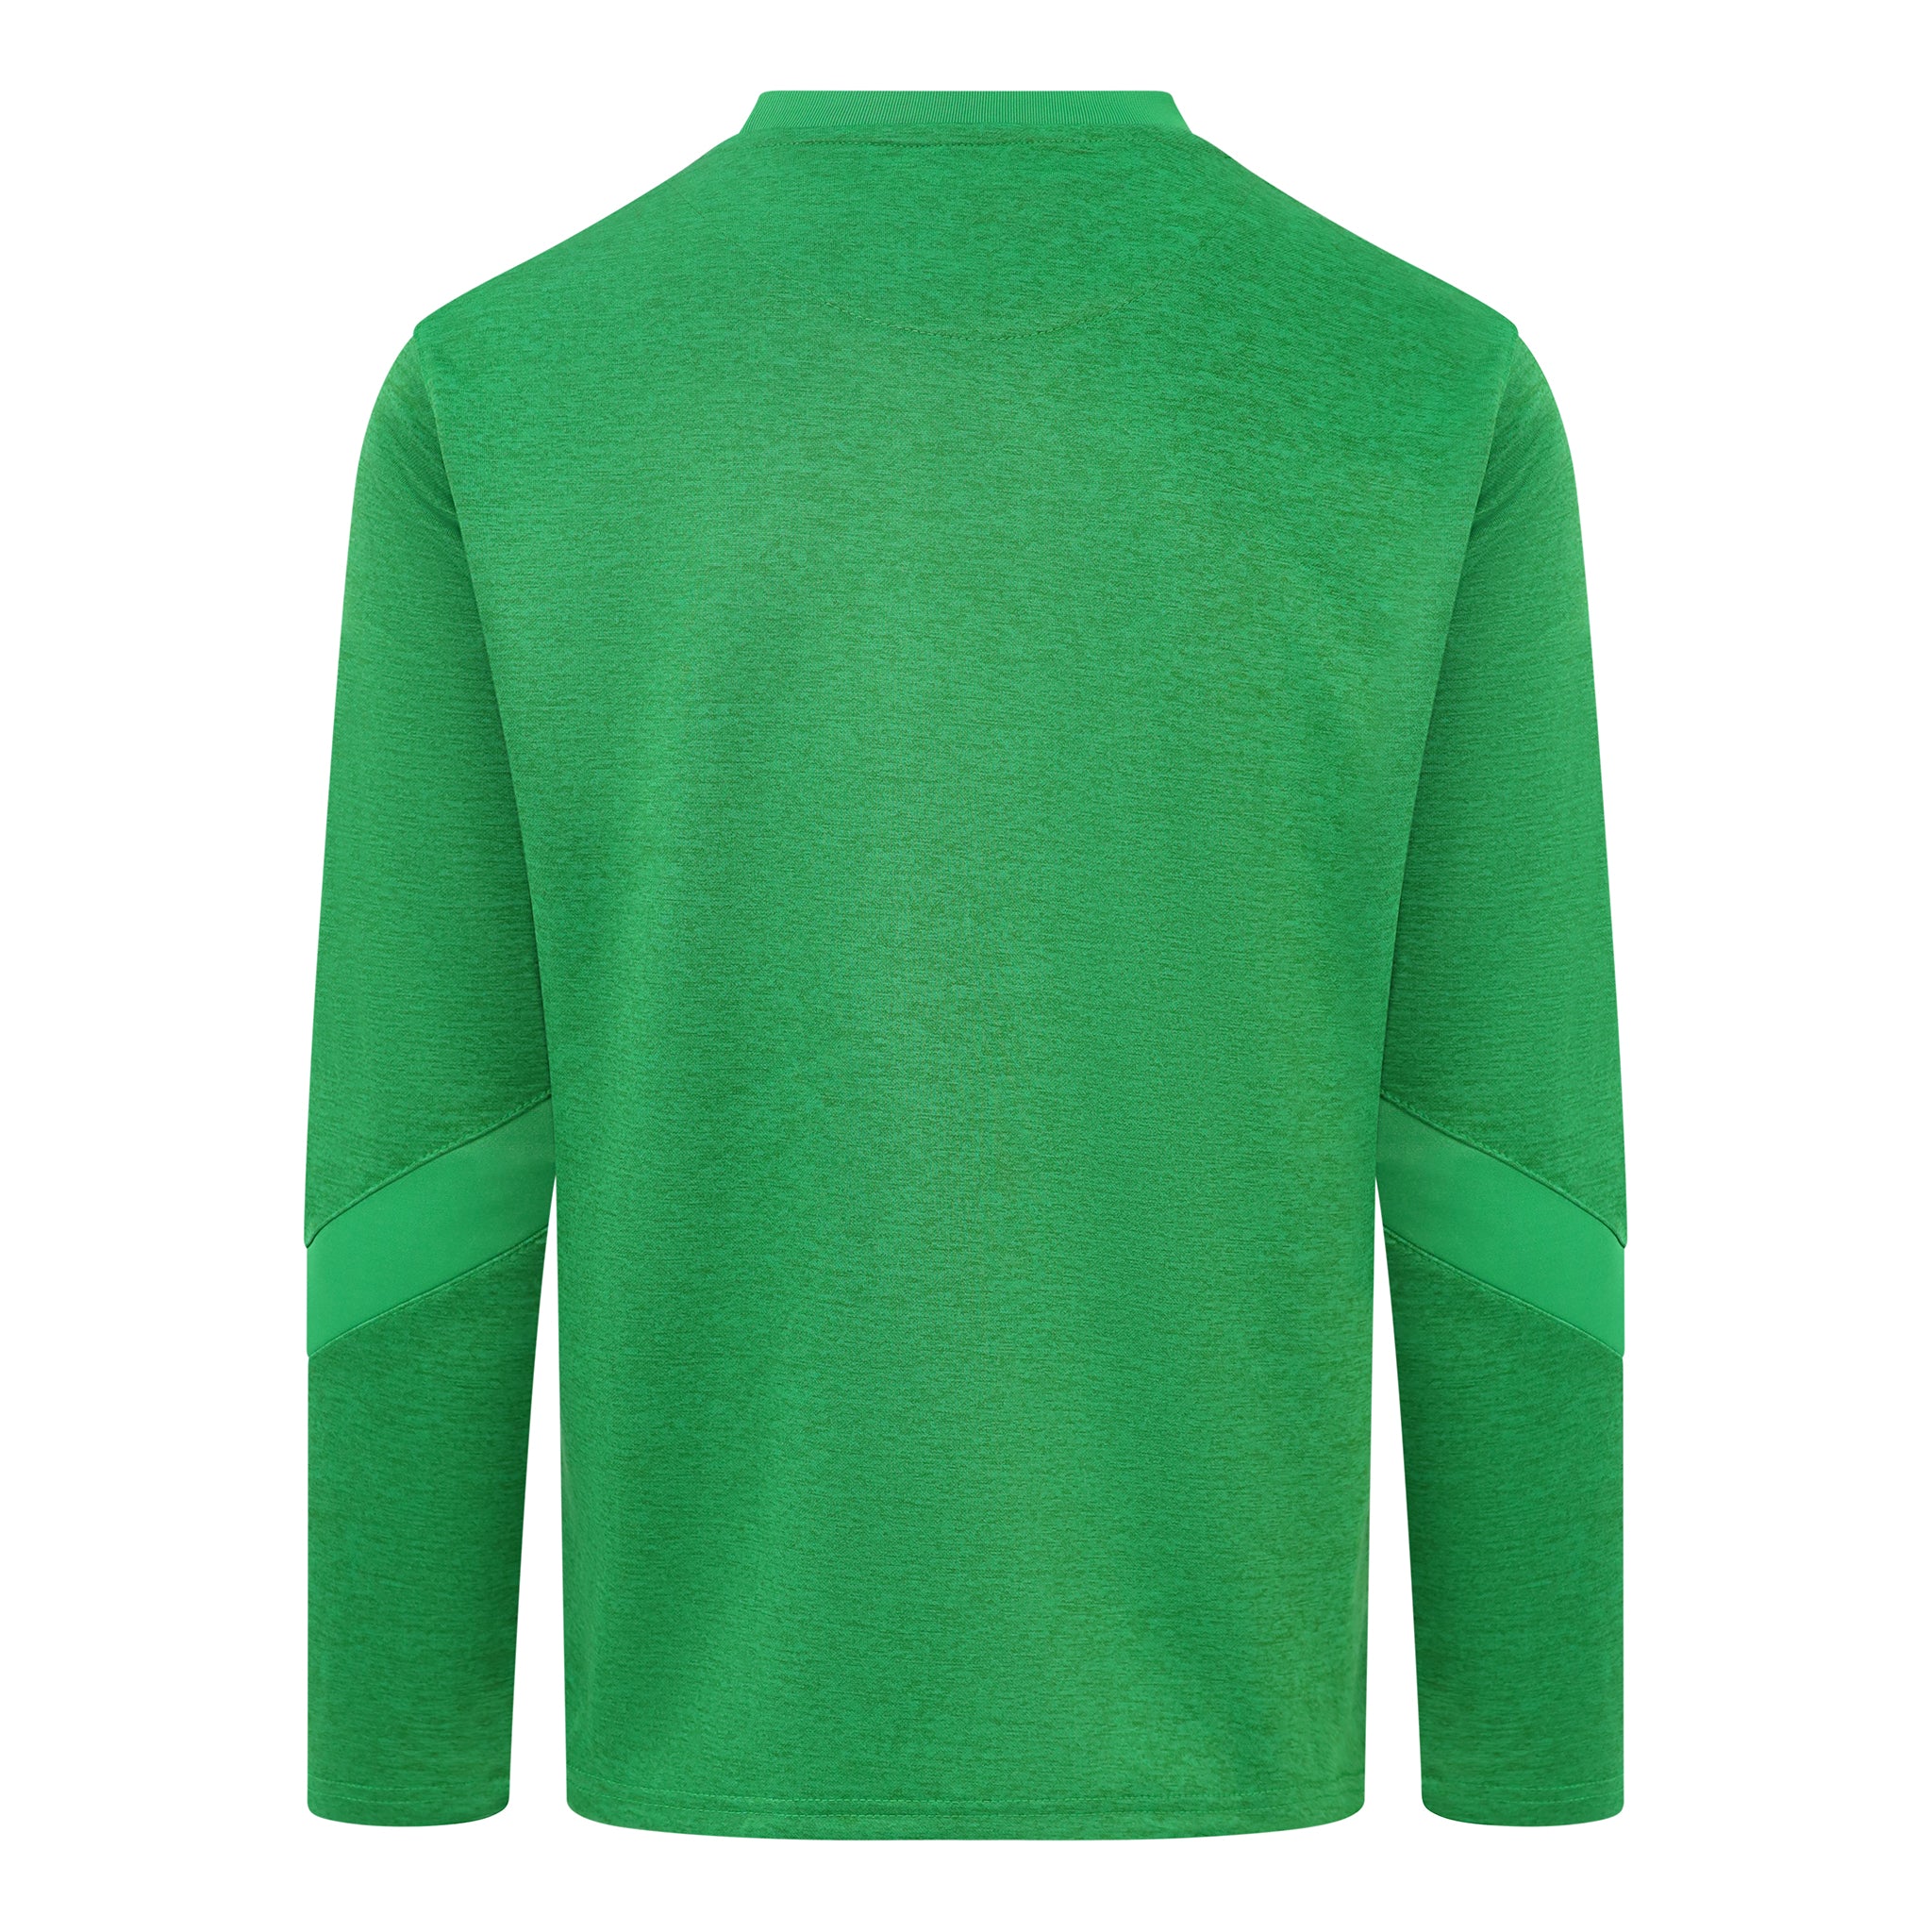 Mc Keever Core 22 Sweat Top - Youth - Green